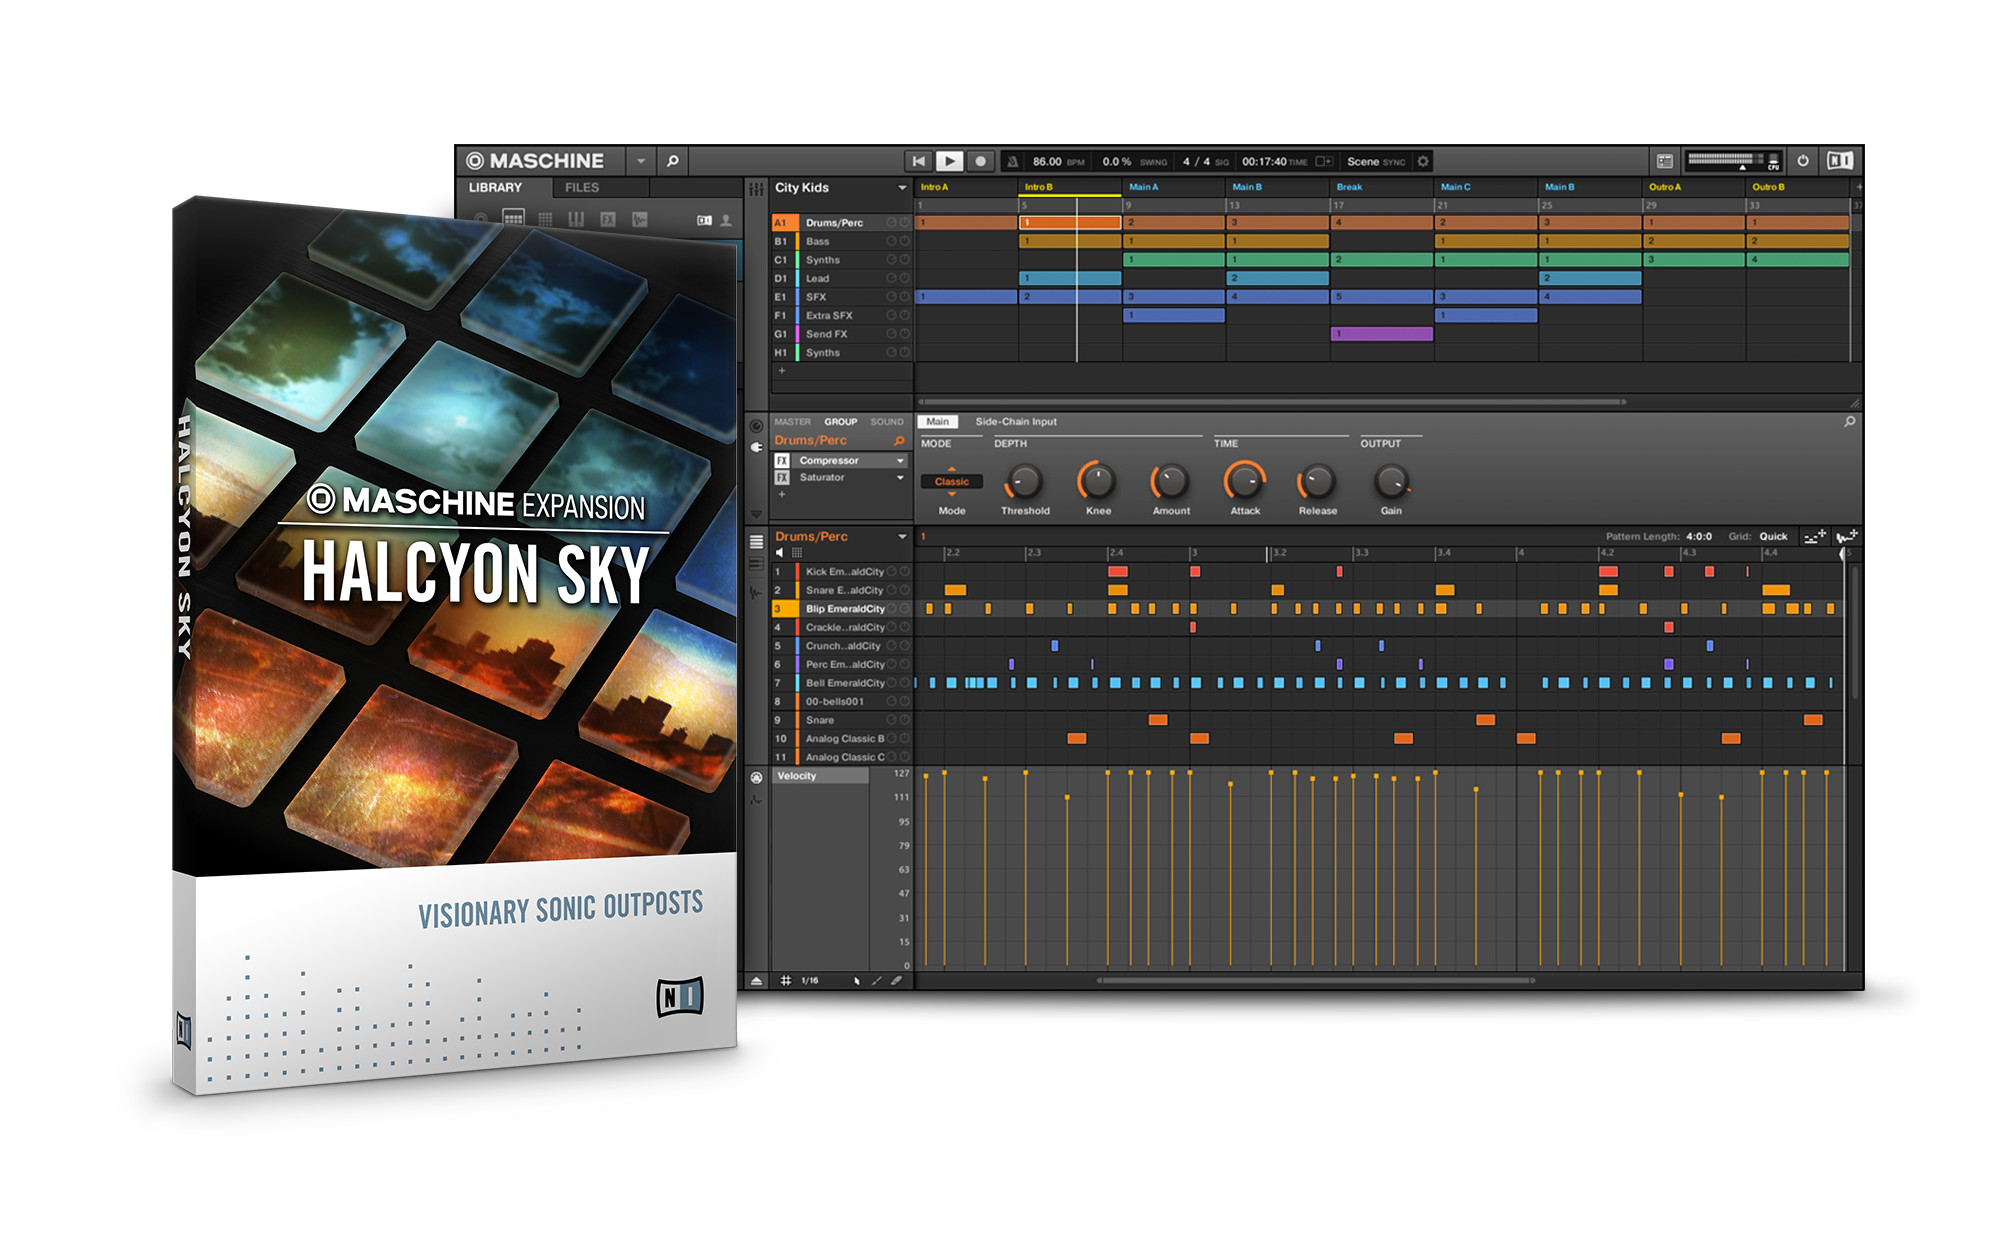 maschine sky expansion halcyon instruments native packs osx unveil synths downtempo rhythms organic ni plugintorrent releases audioplugin delivering announced release